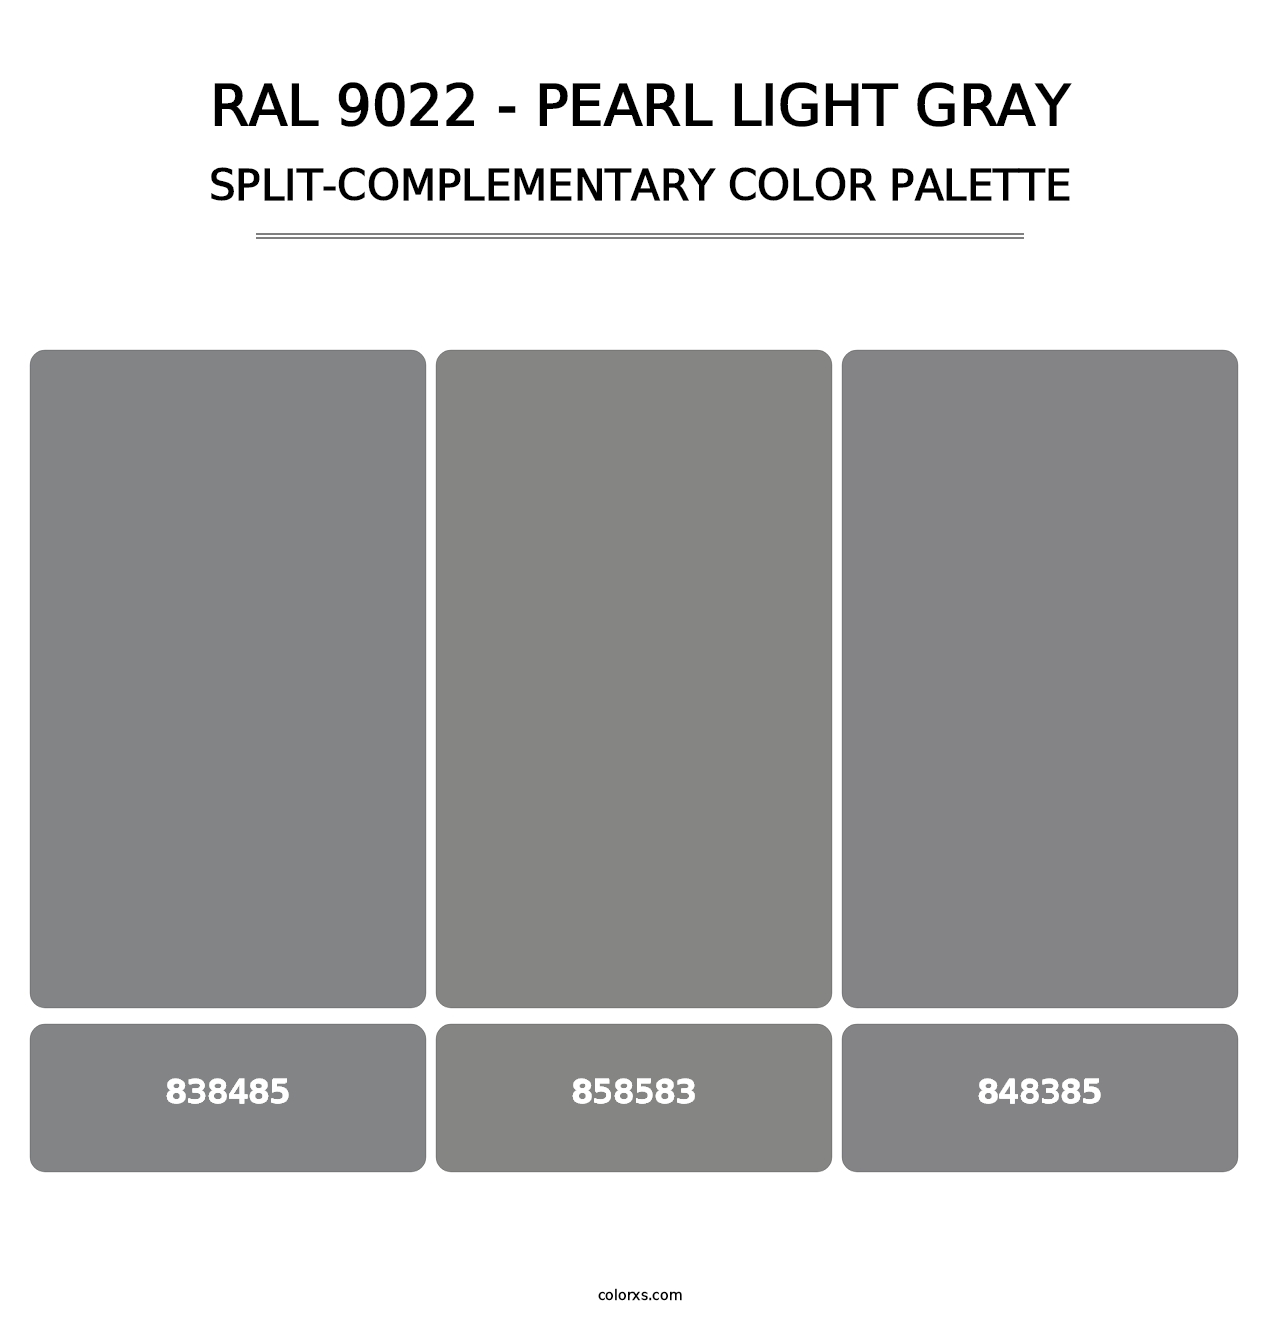 RAL 9022 - Pearl Light Gray - Split-Complementary Color Palette